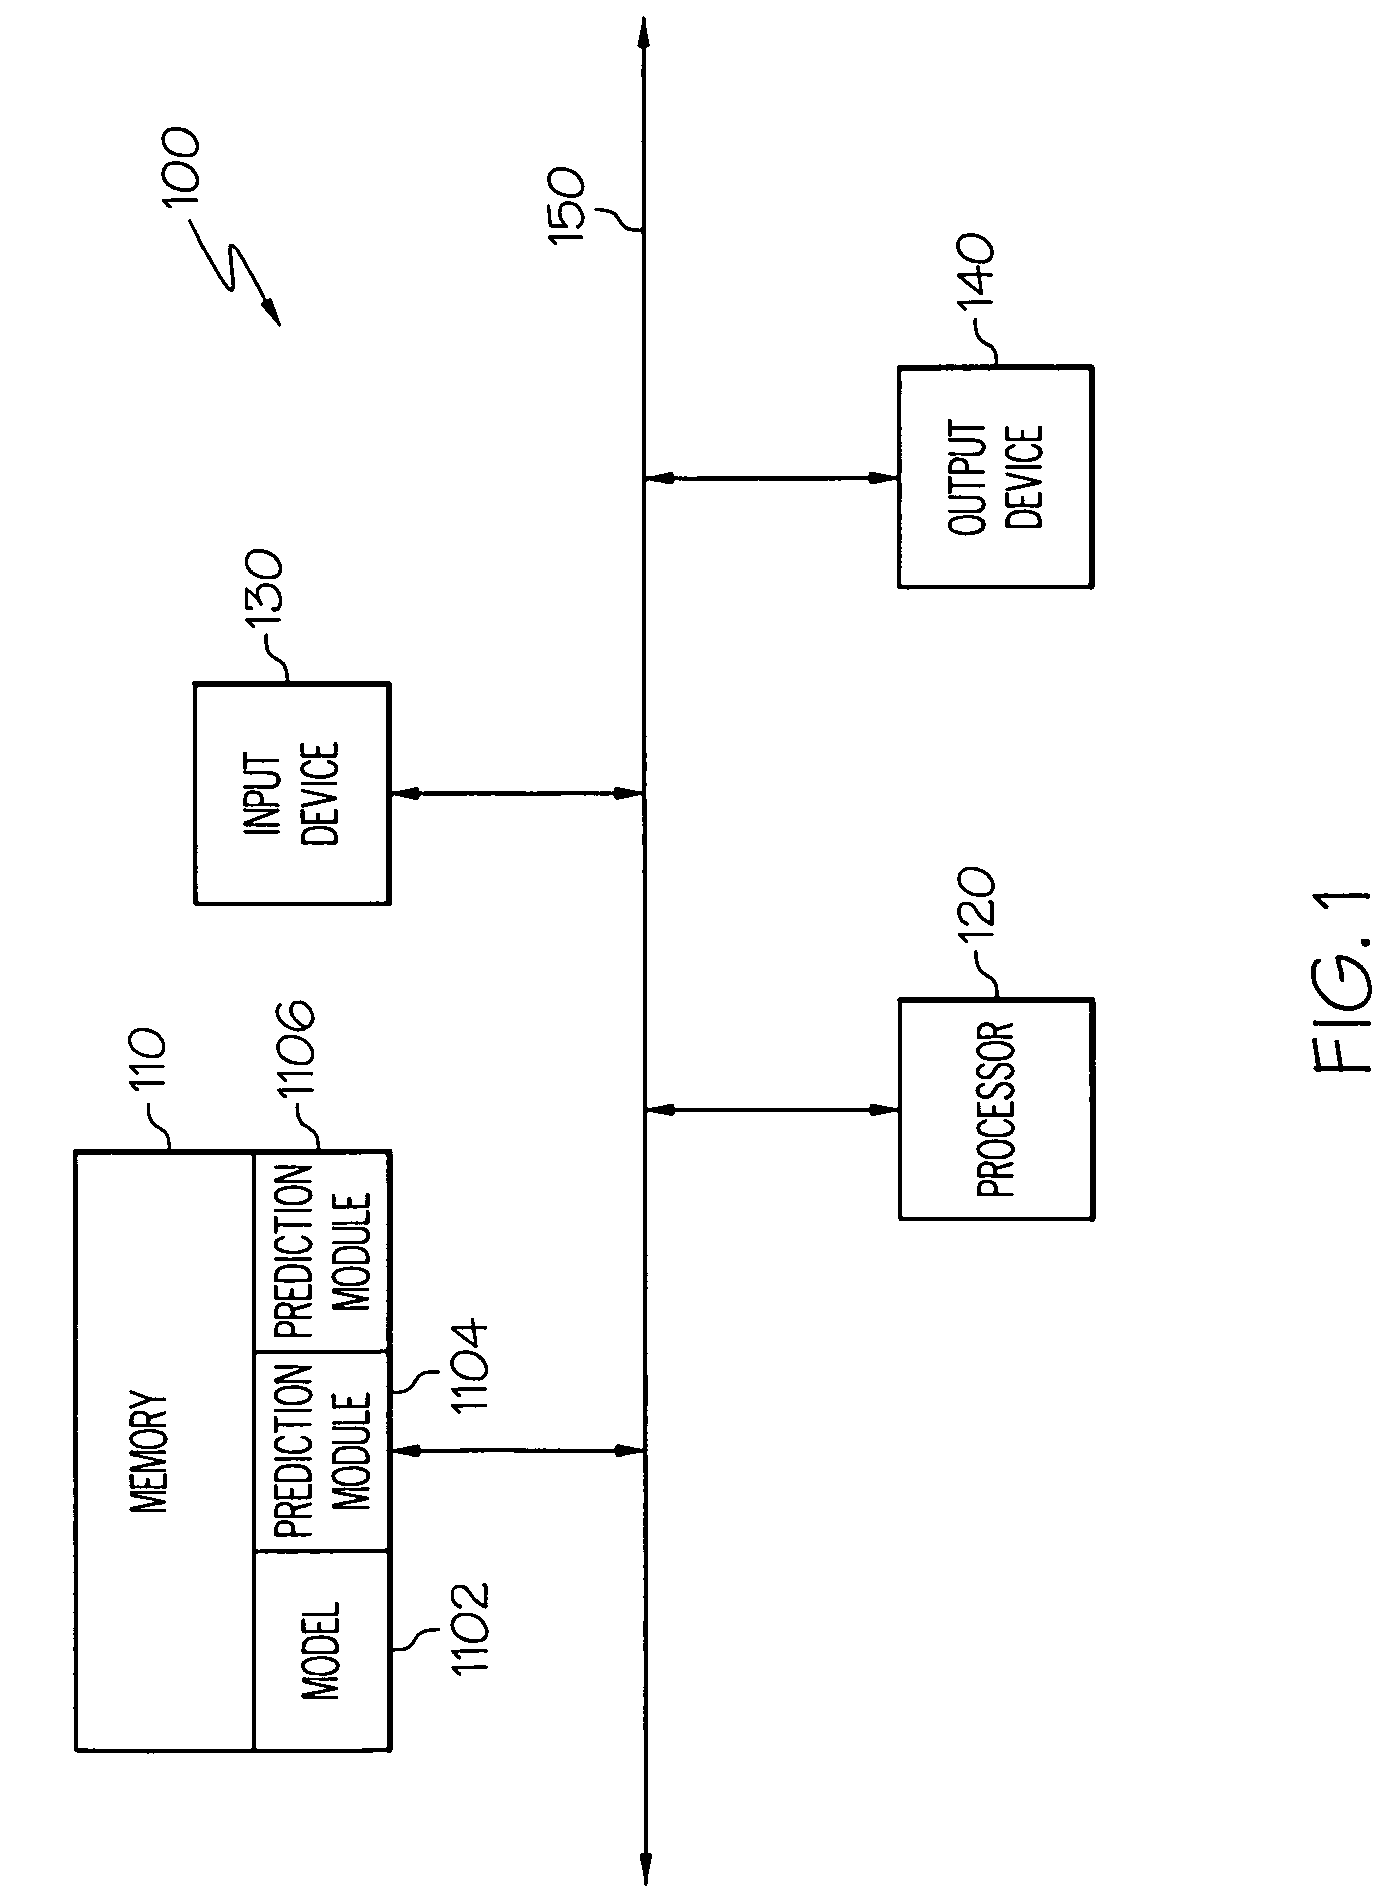 Apparatus and methods for simulating a system steady state devoid of performing full transient operating conditions